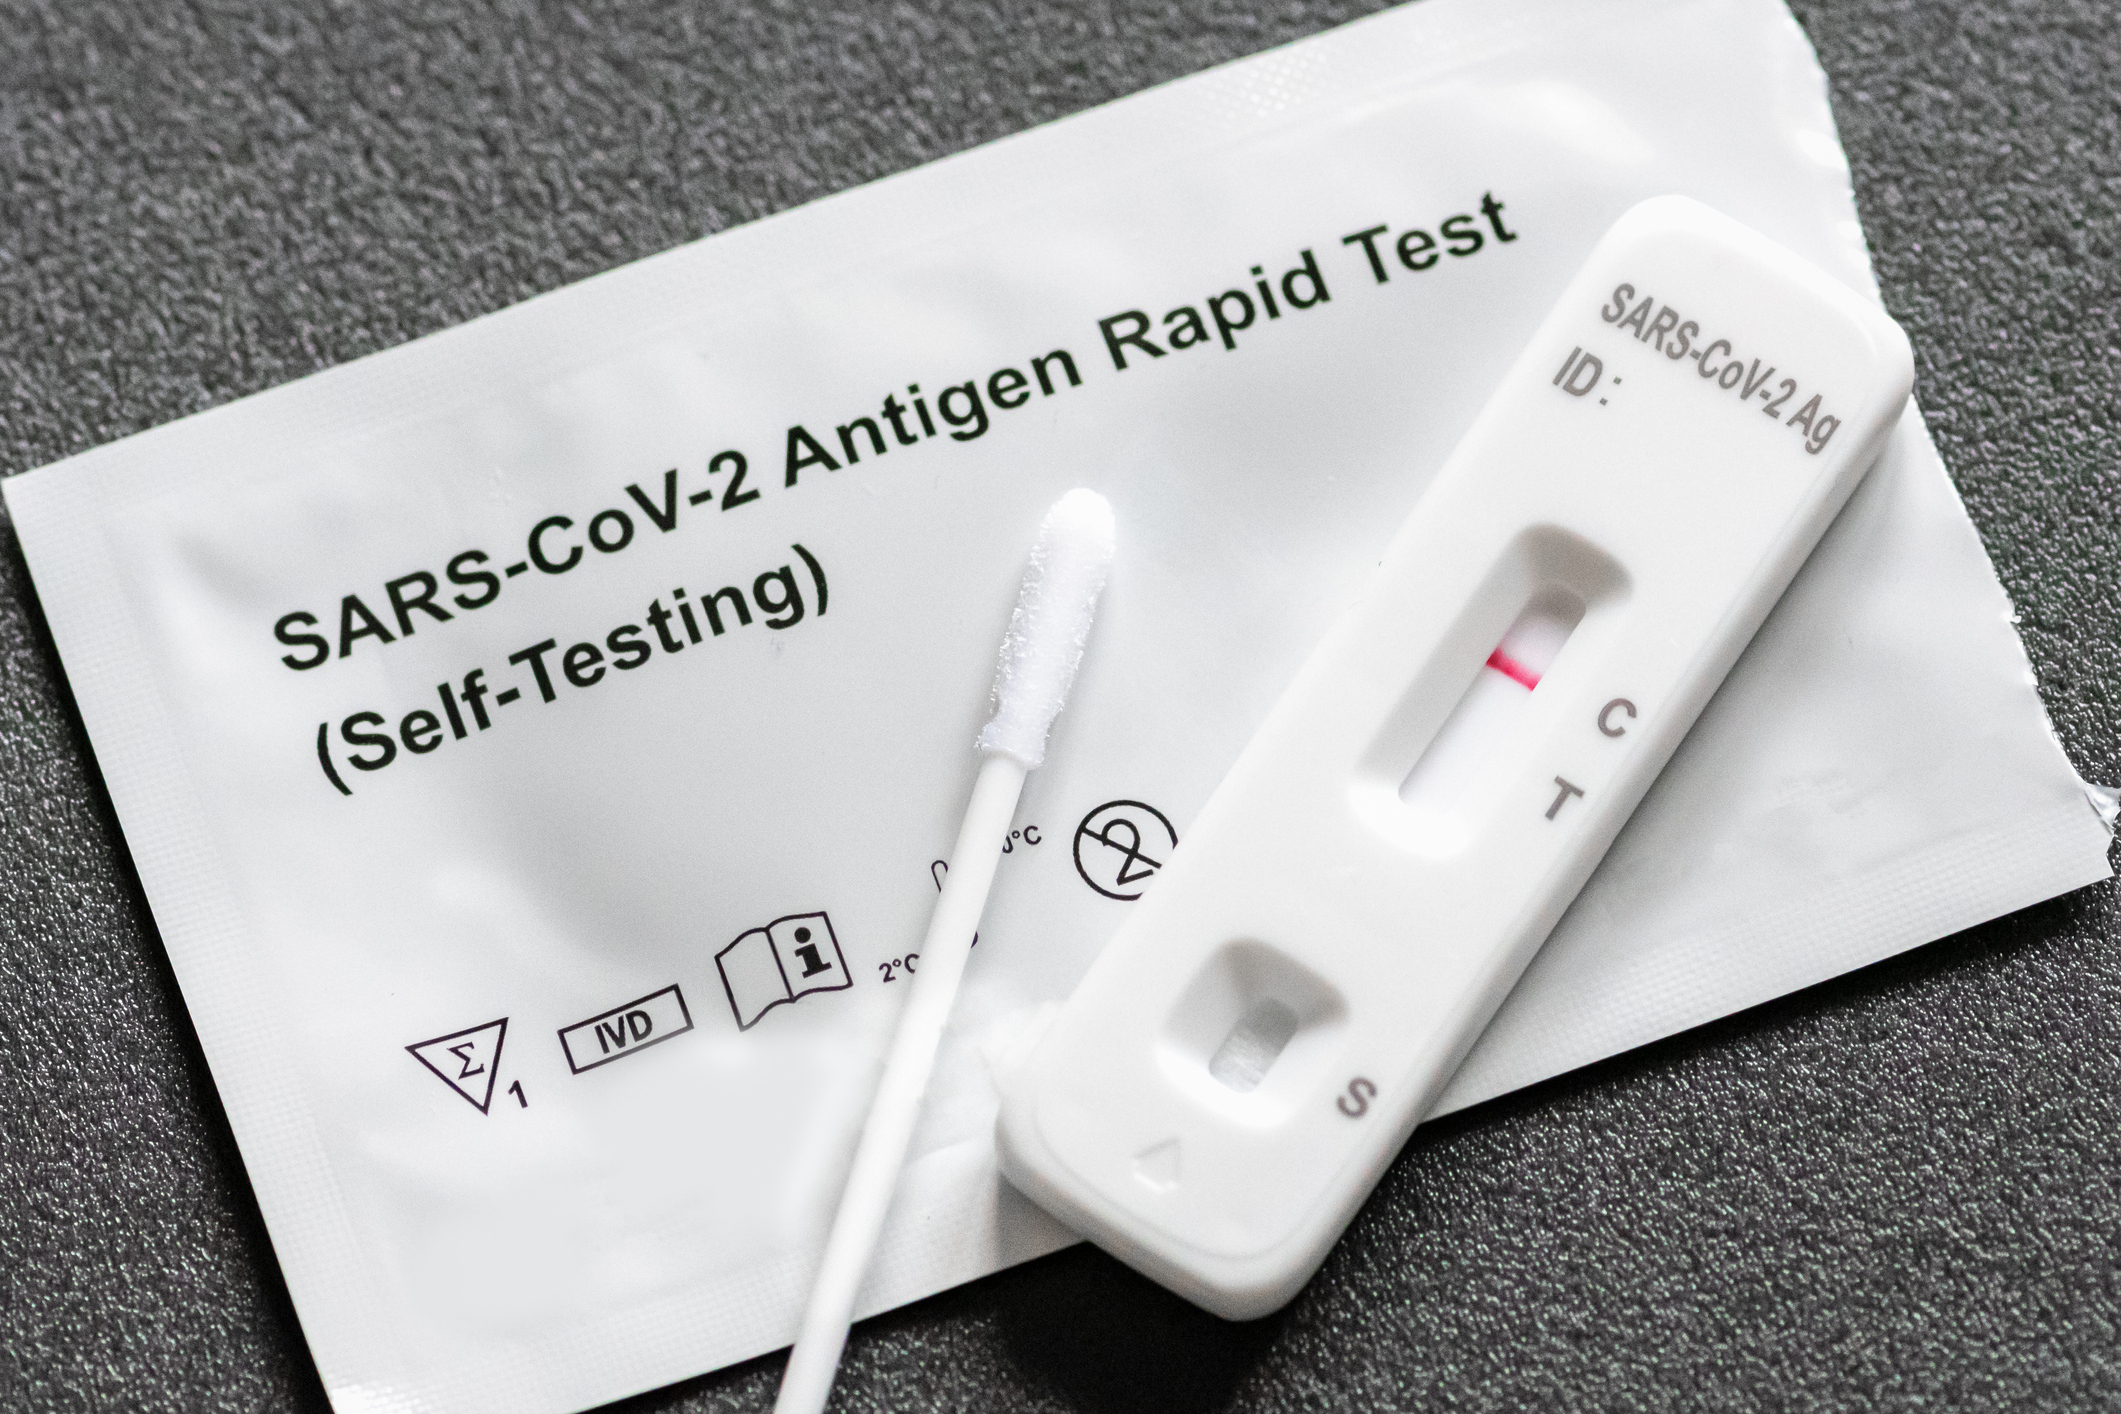 Are The Home Covid Test Kits Dangerous?